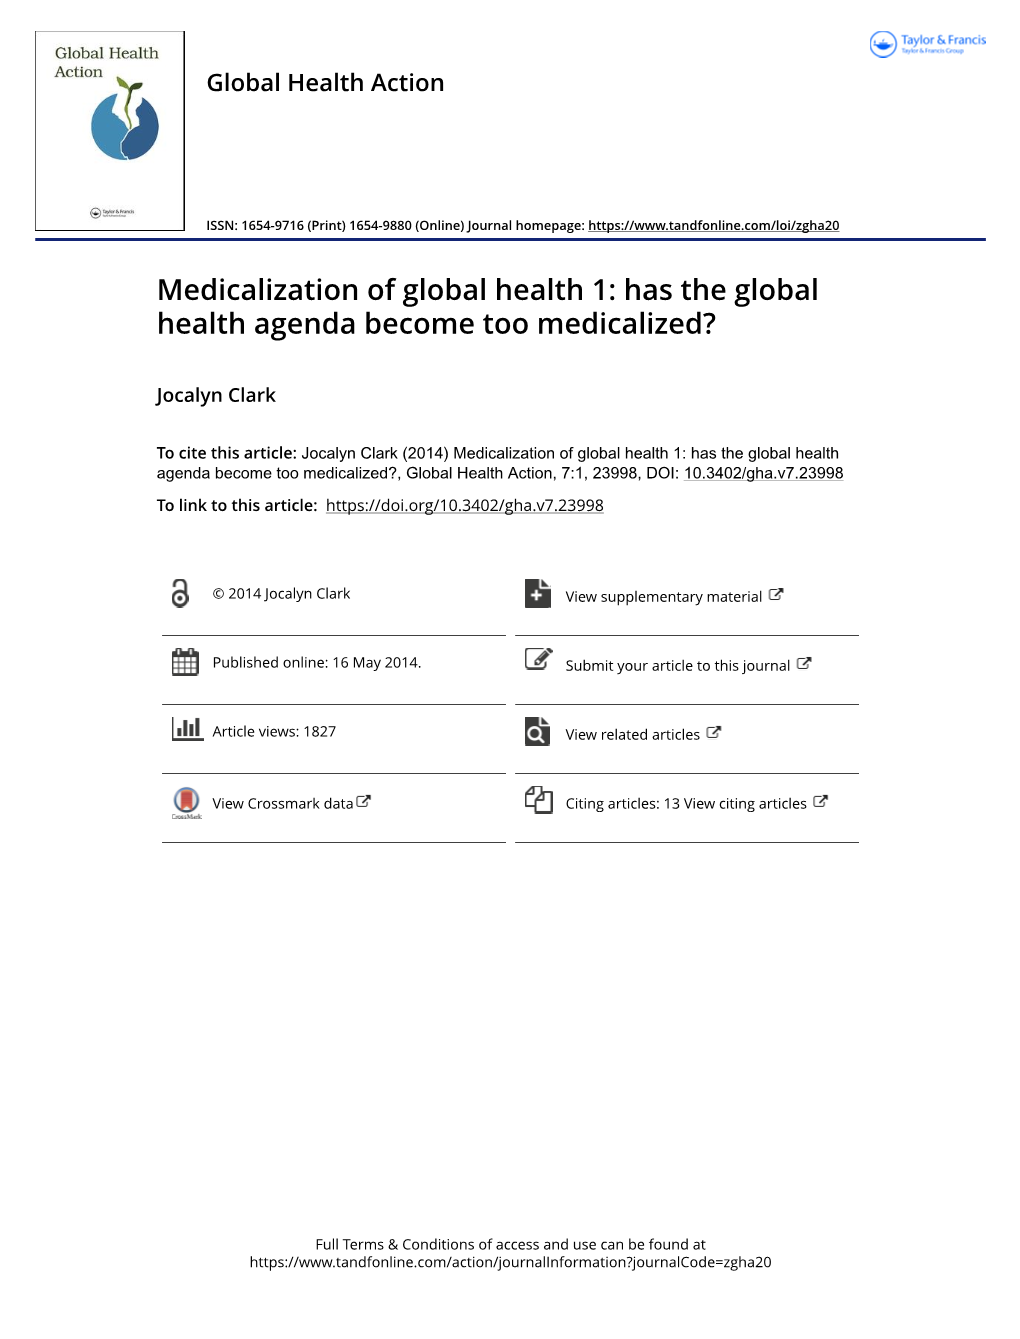 Has the Global Health Agenda Become Too Medicalized?